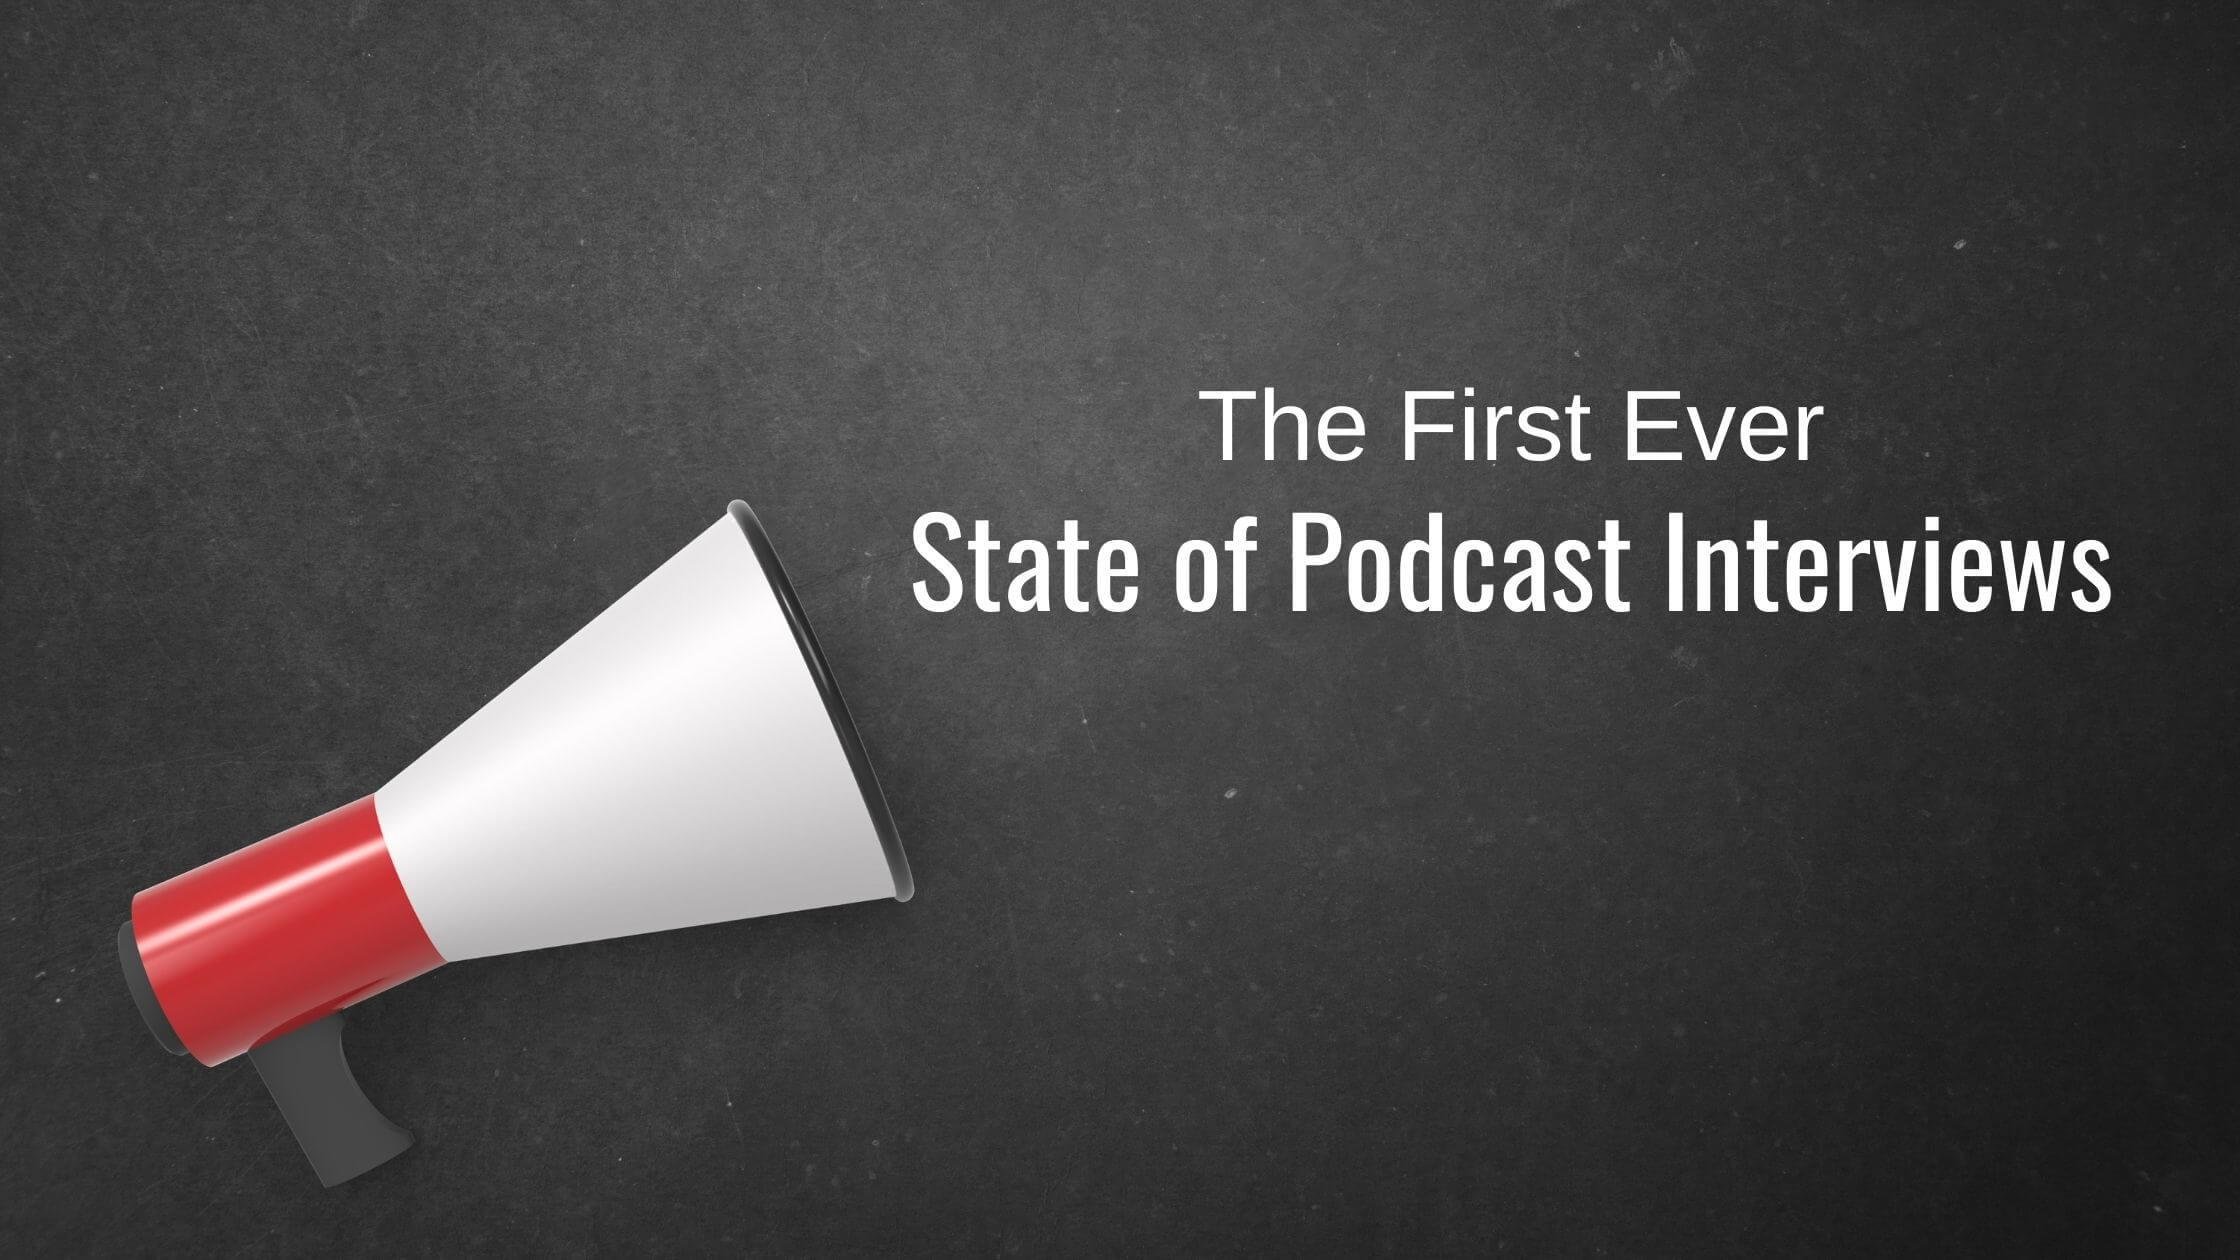 First Ever State of Podcast Interviews Report